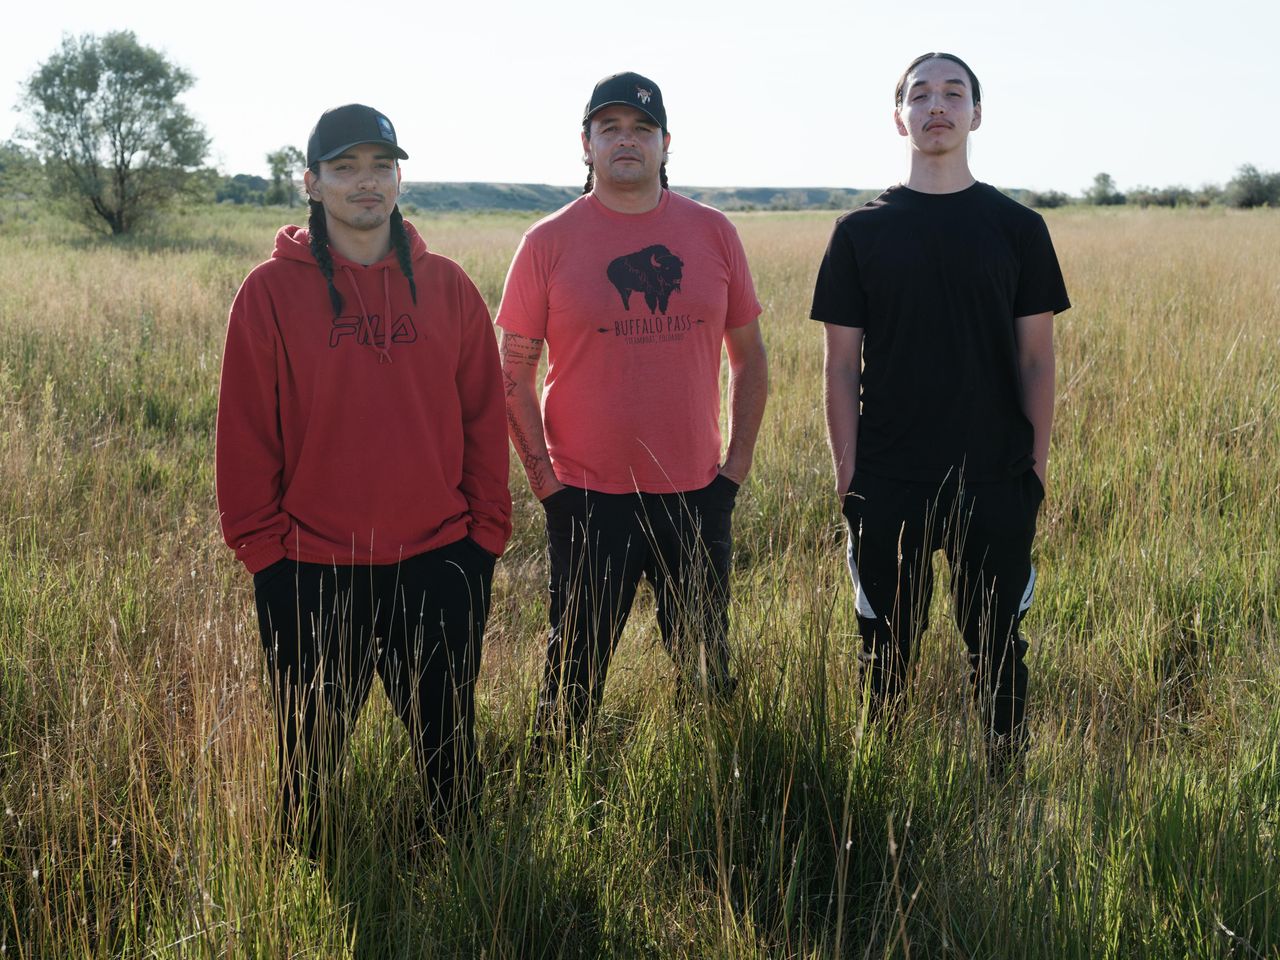 Jason Baldes, center, and his sons Dorian, left, and Kenyan, right, on the land of the Wind River Tribal Buffalo Initiative, Aug. 16, 2023. Baldes founded the Wind River Tribal Buffalo Initiative. His father, Richard Baldes, a biologist and retired U.S. Fish and Wildlife Service project leader, taught him about restoration and conservation. Jason is now passing down that knowledge to his sons.